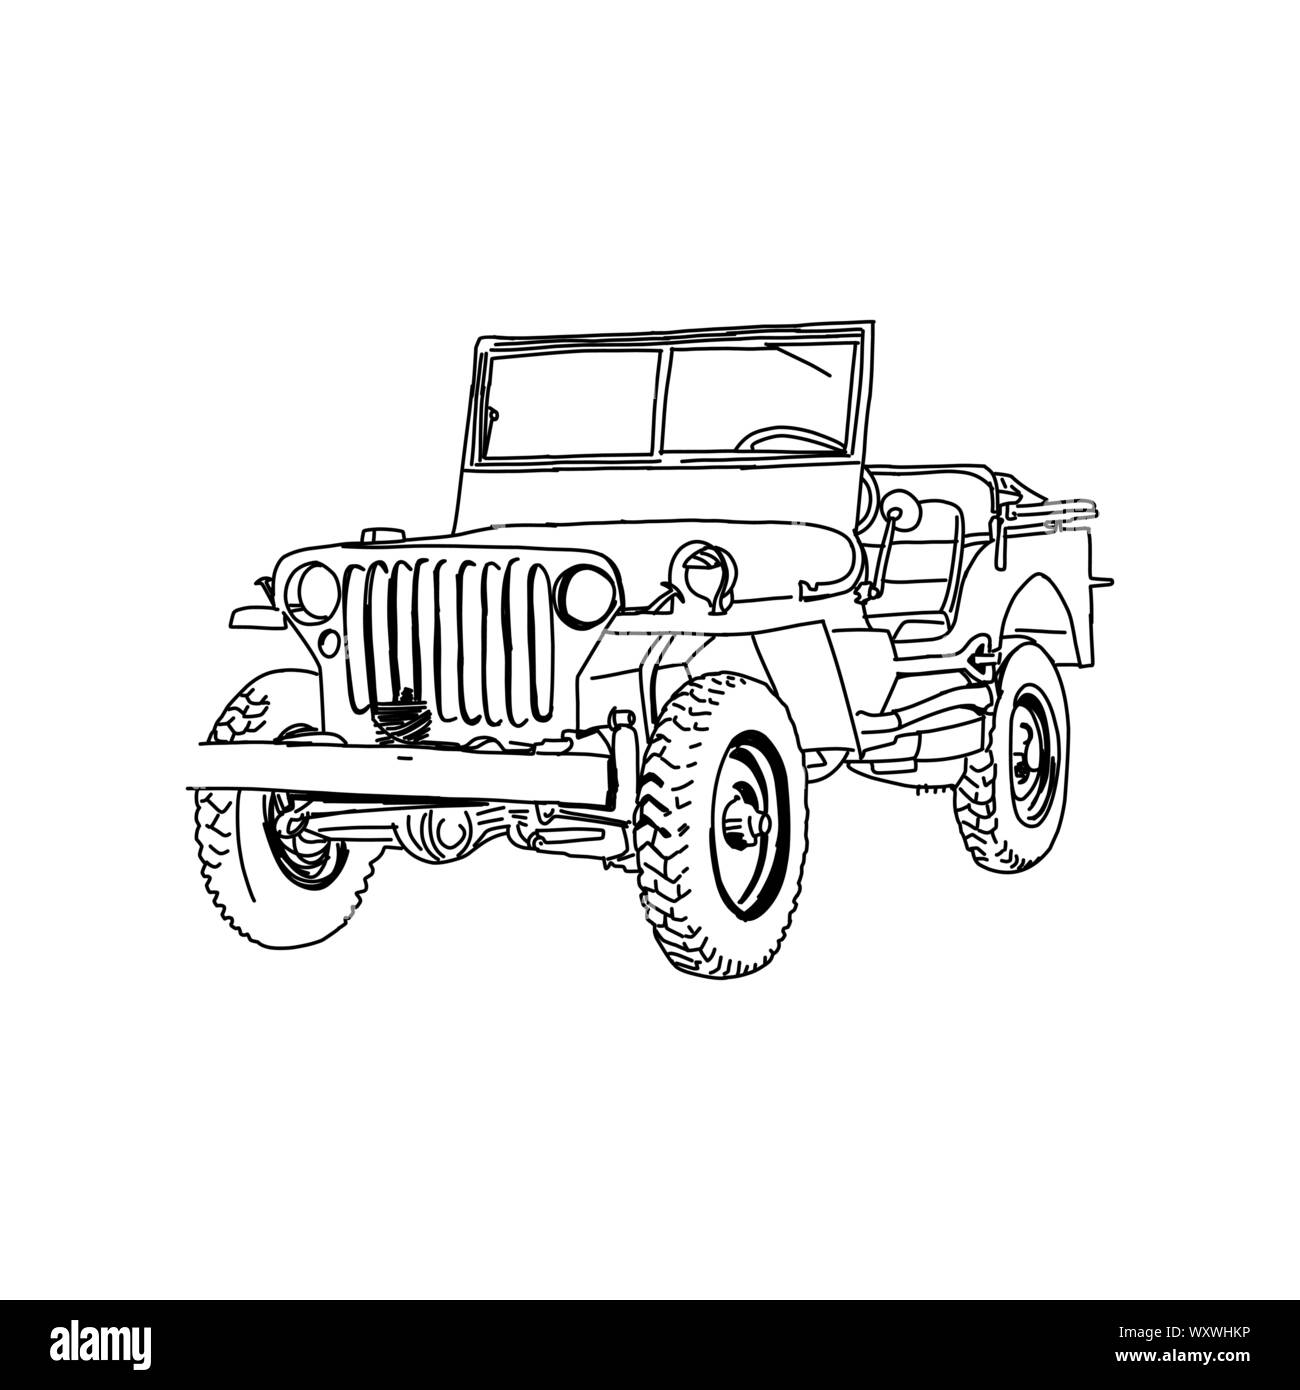 Military vehicle jeep army vector line art Hand drawn illustration Stock Vector